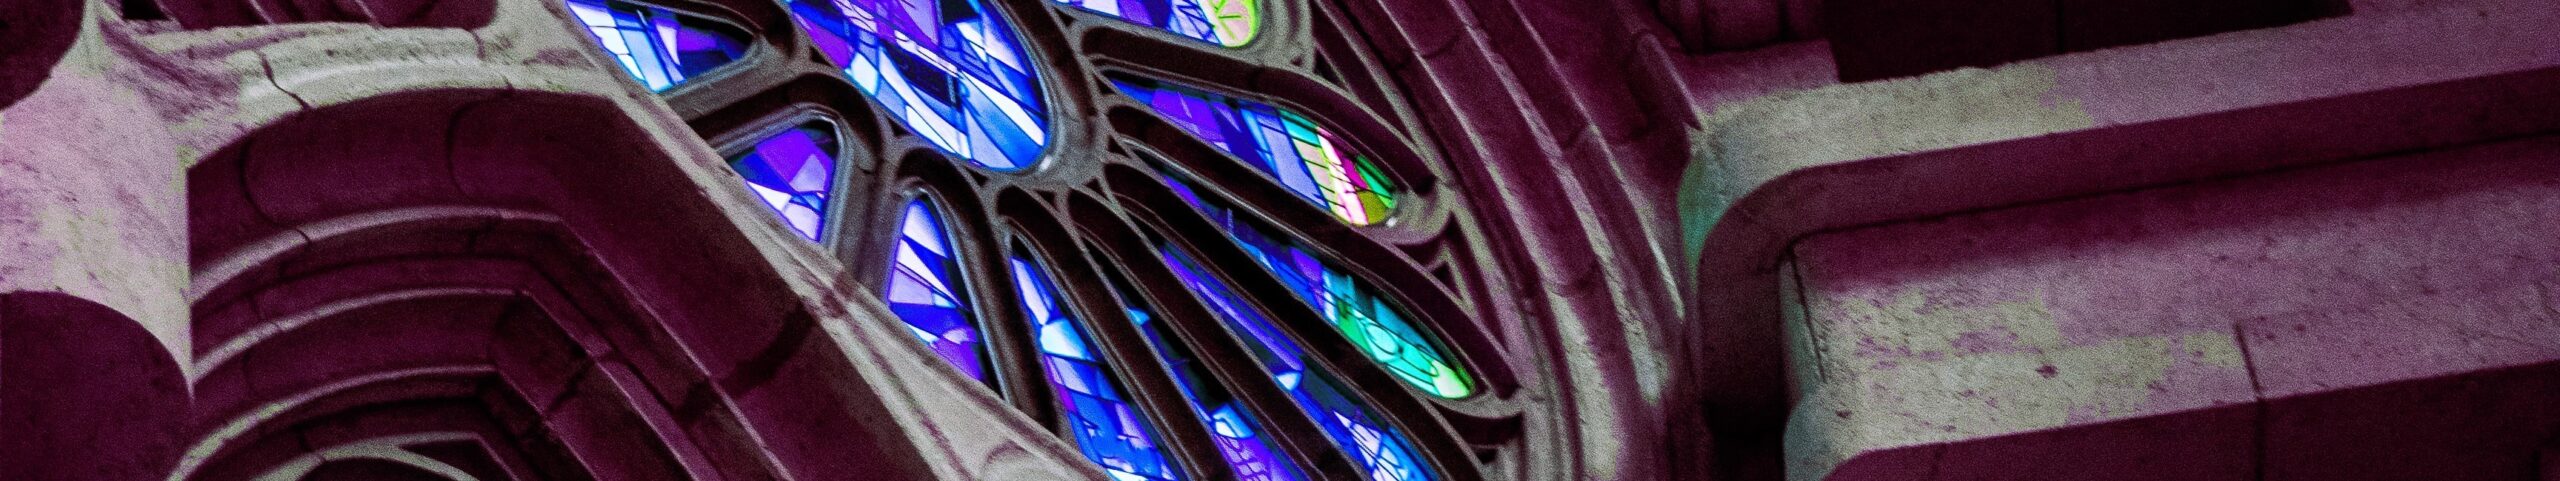 blue stained glass window of a church 650 px high